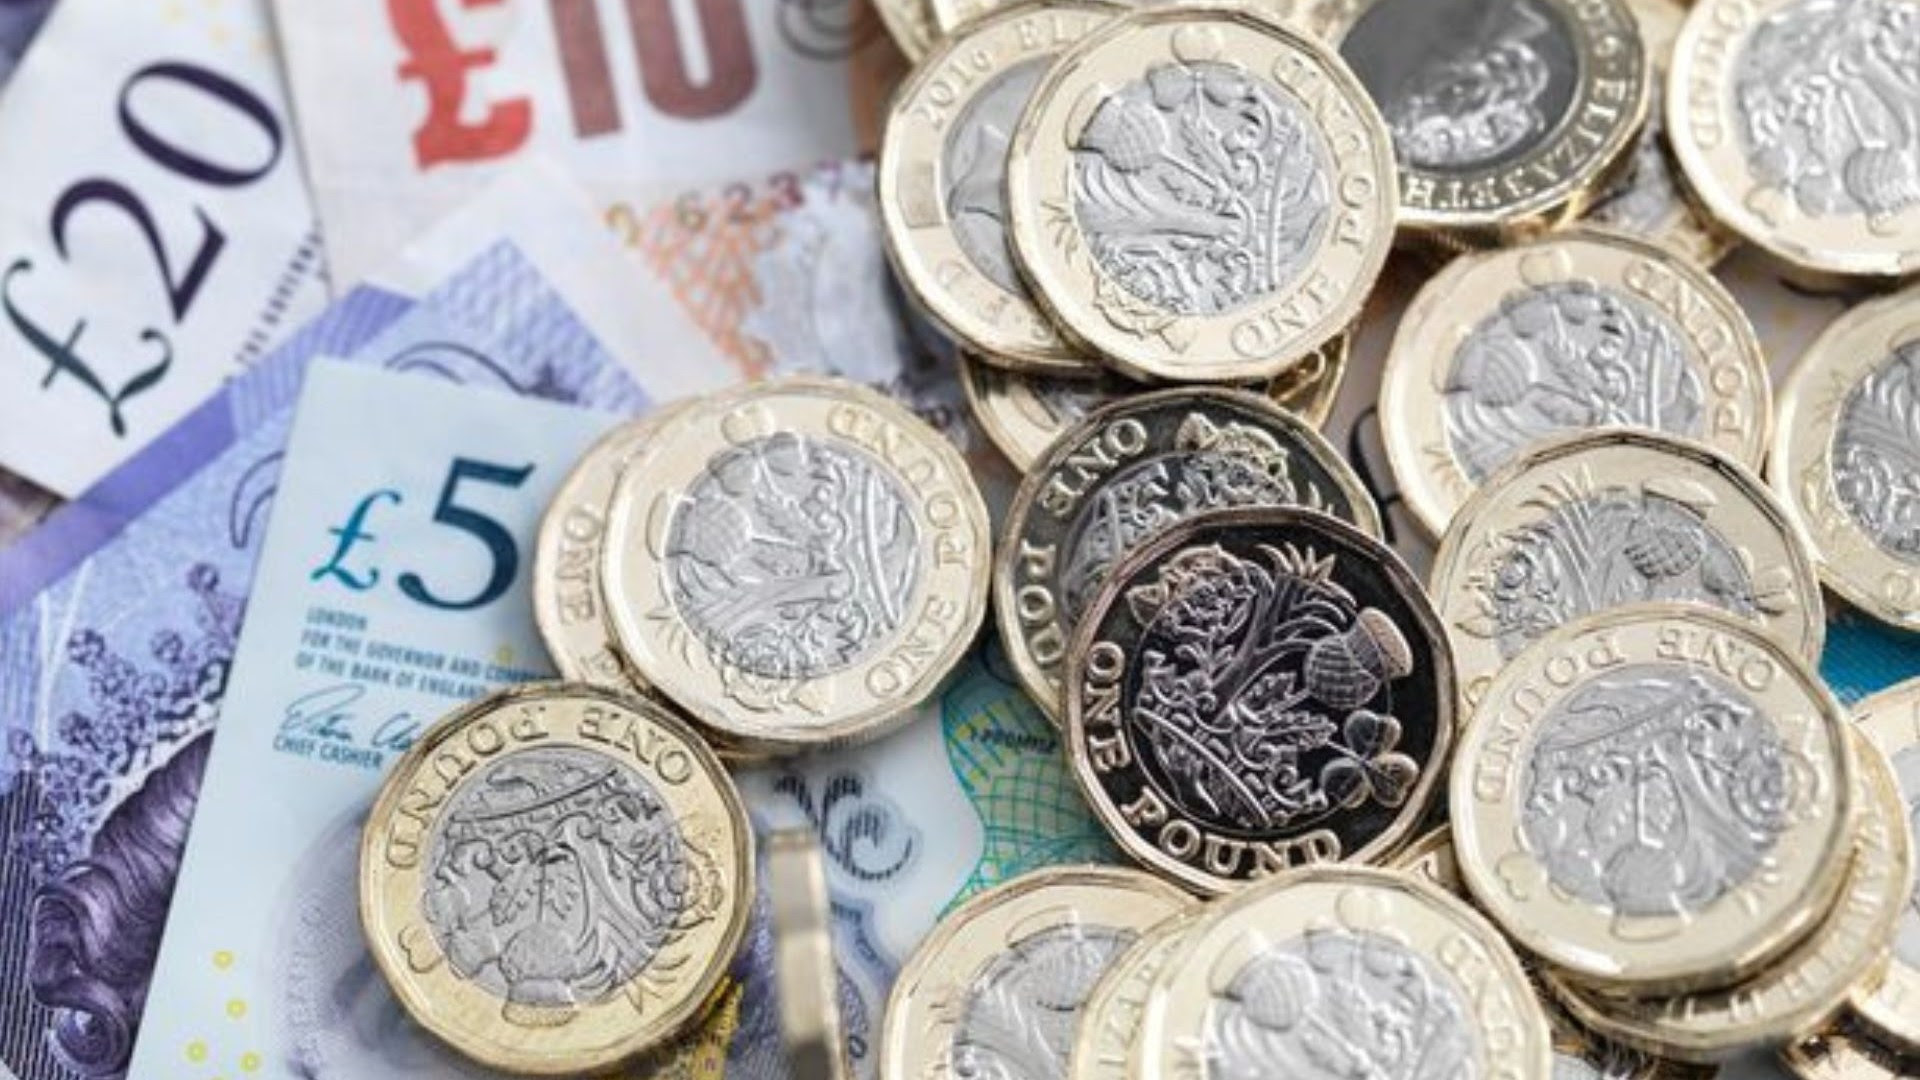 Cost of Living payment latest: MAJOR universal credit shake-up could hit millions of Brits...